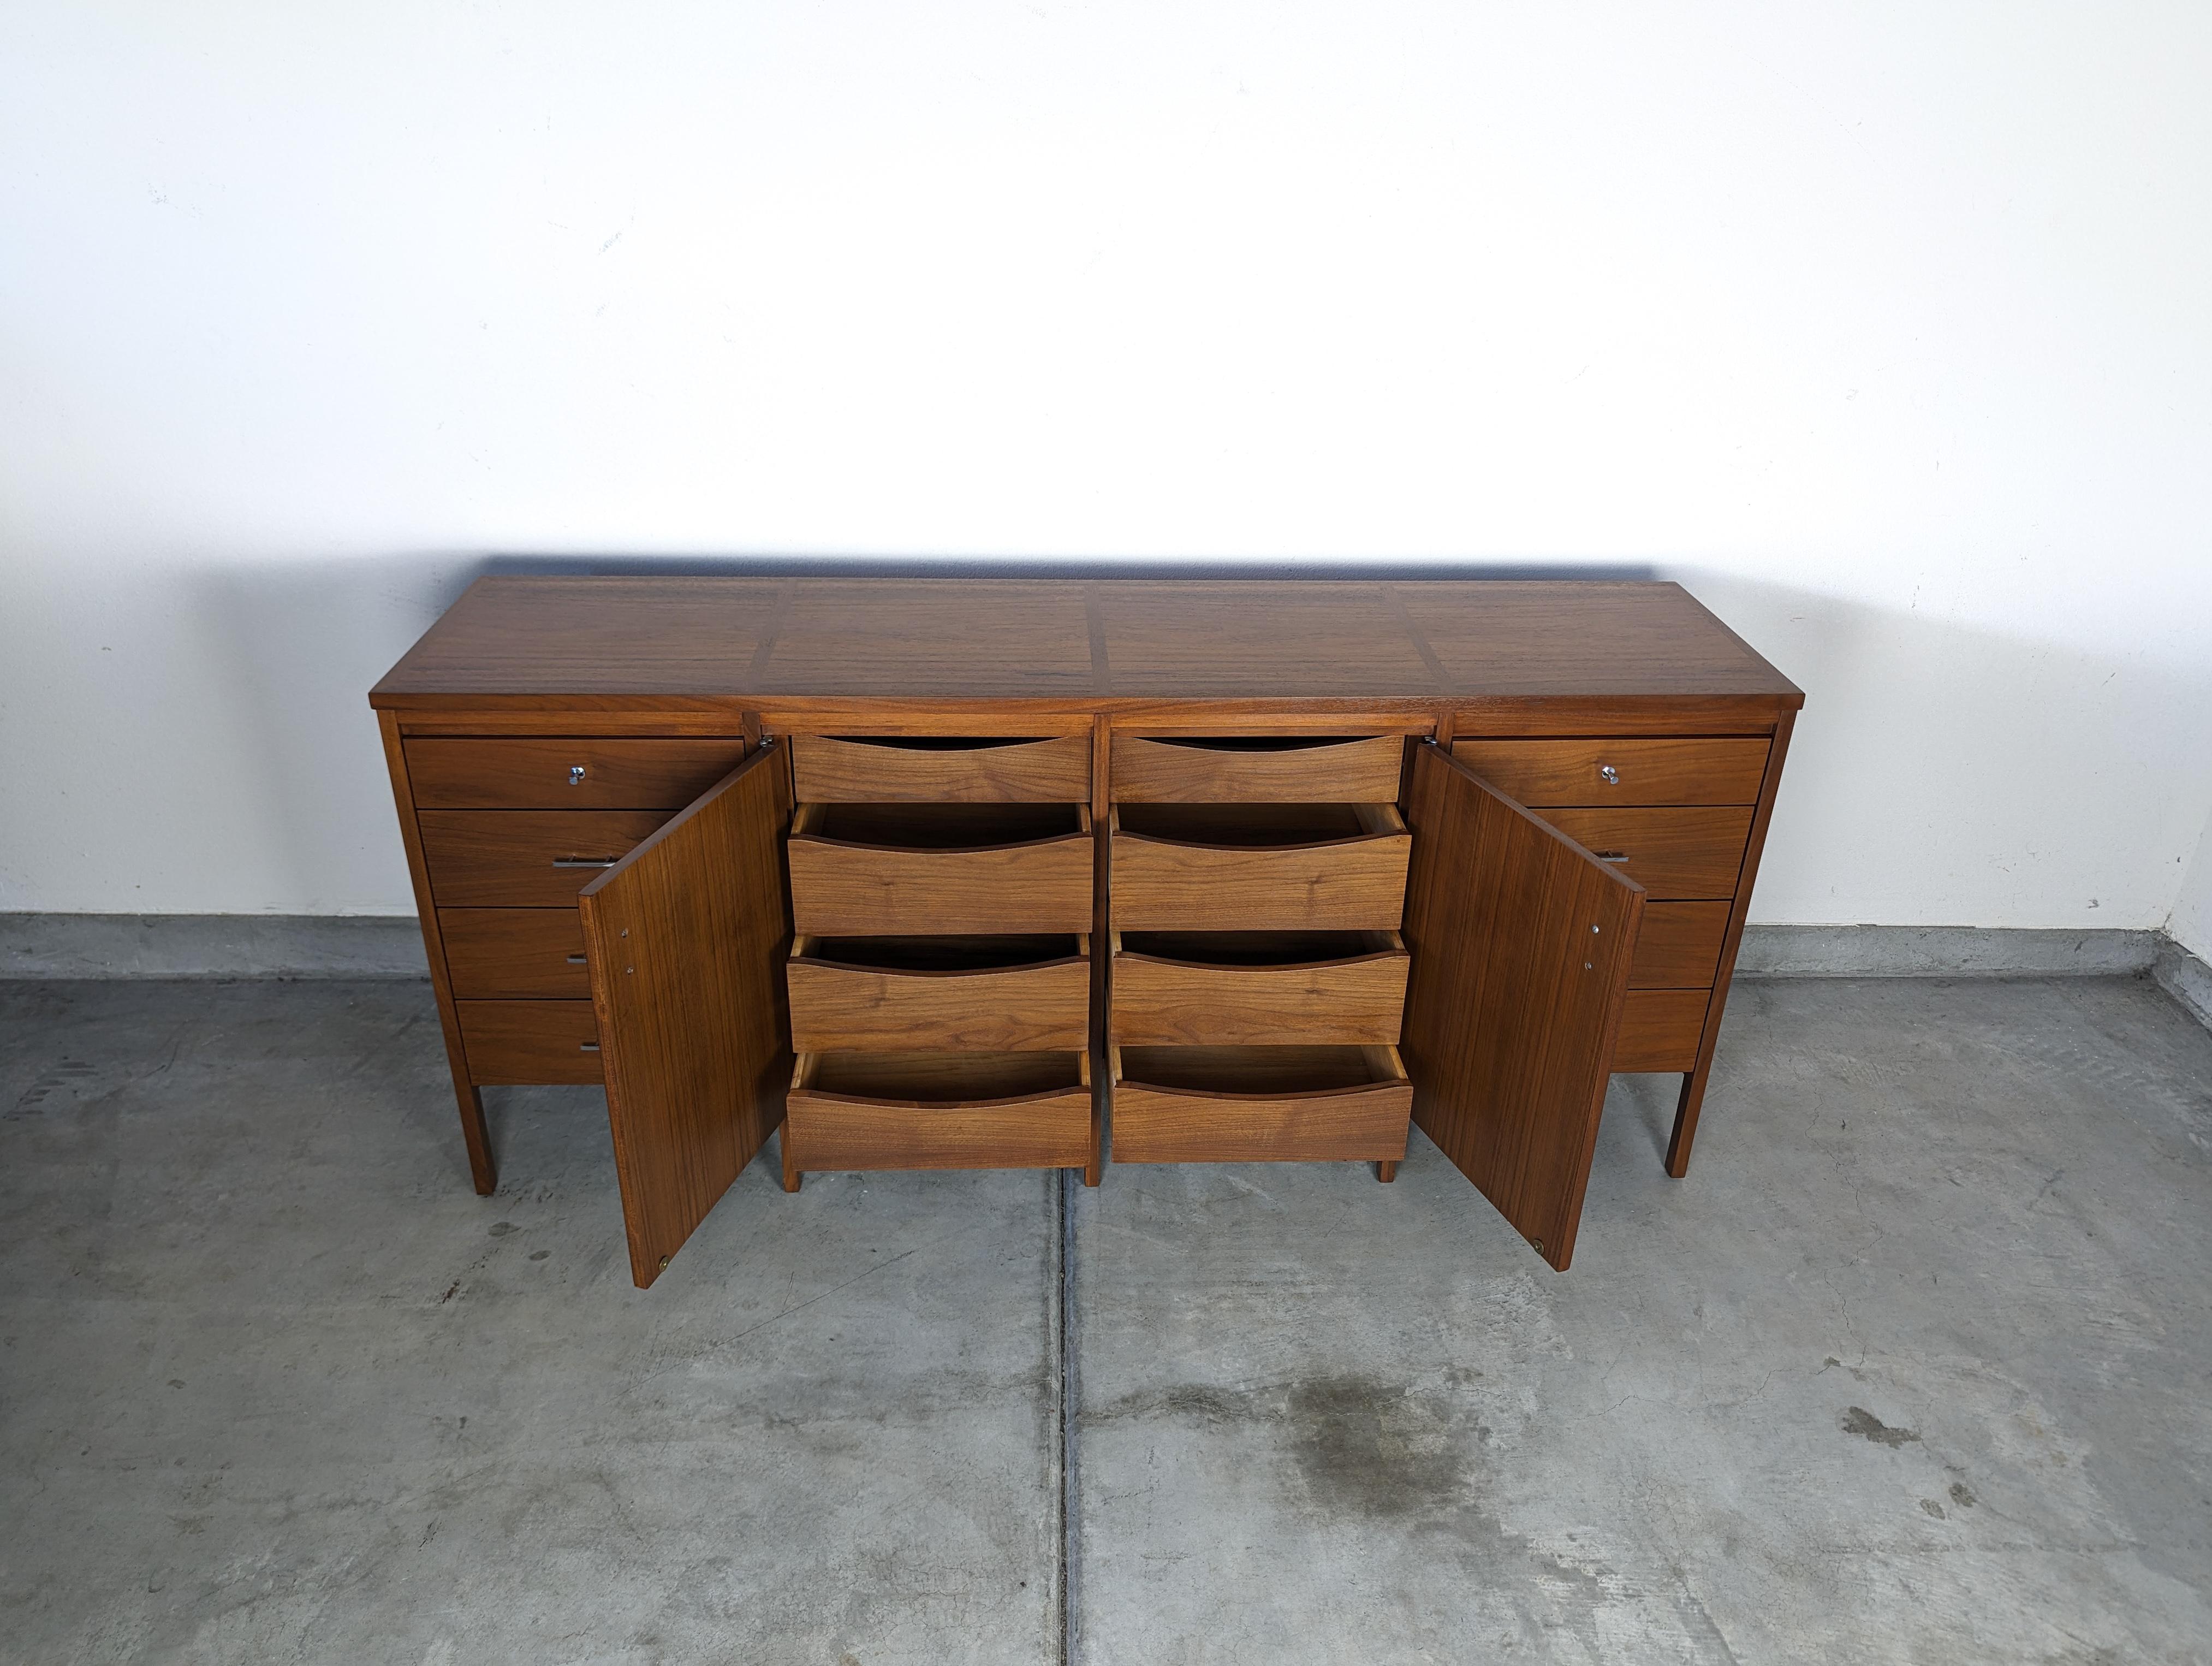 American Mid Century Modern Delineator Dresser by Paul McCobb for Lane, c1960s For Sale